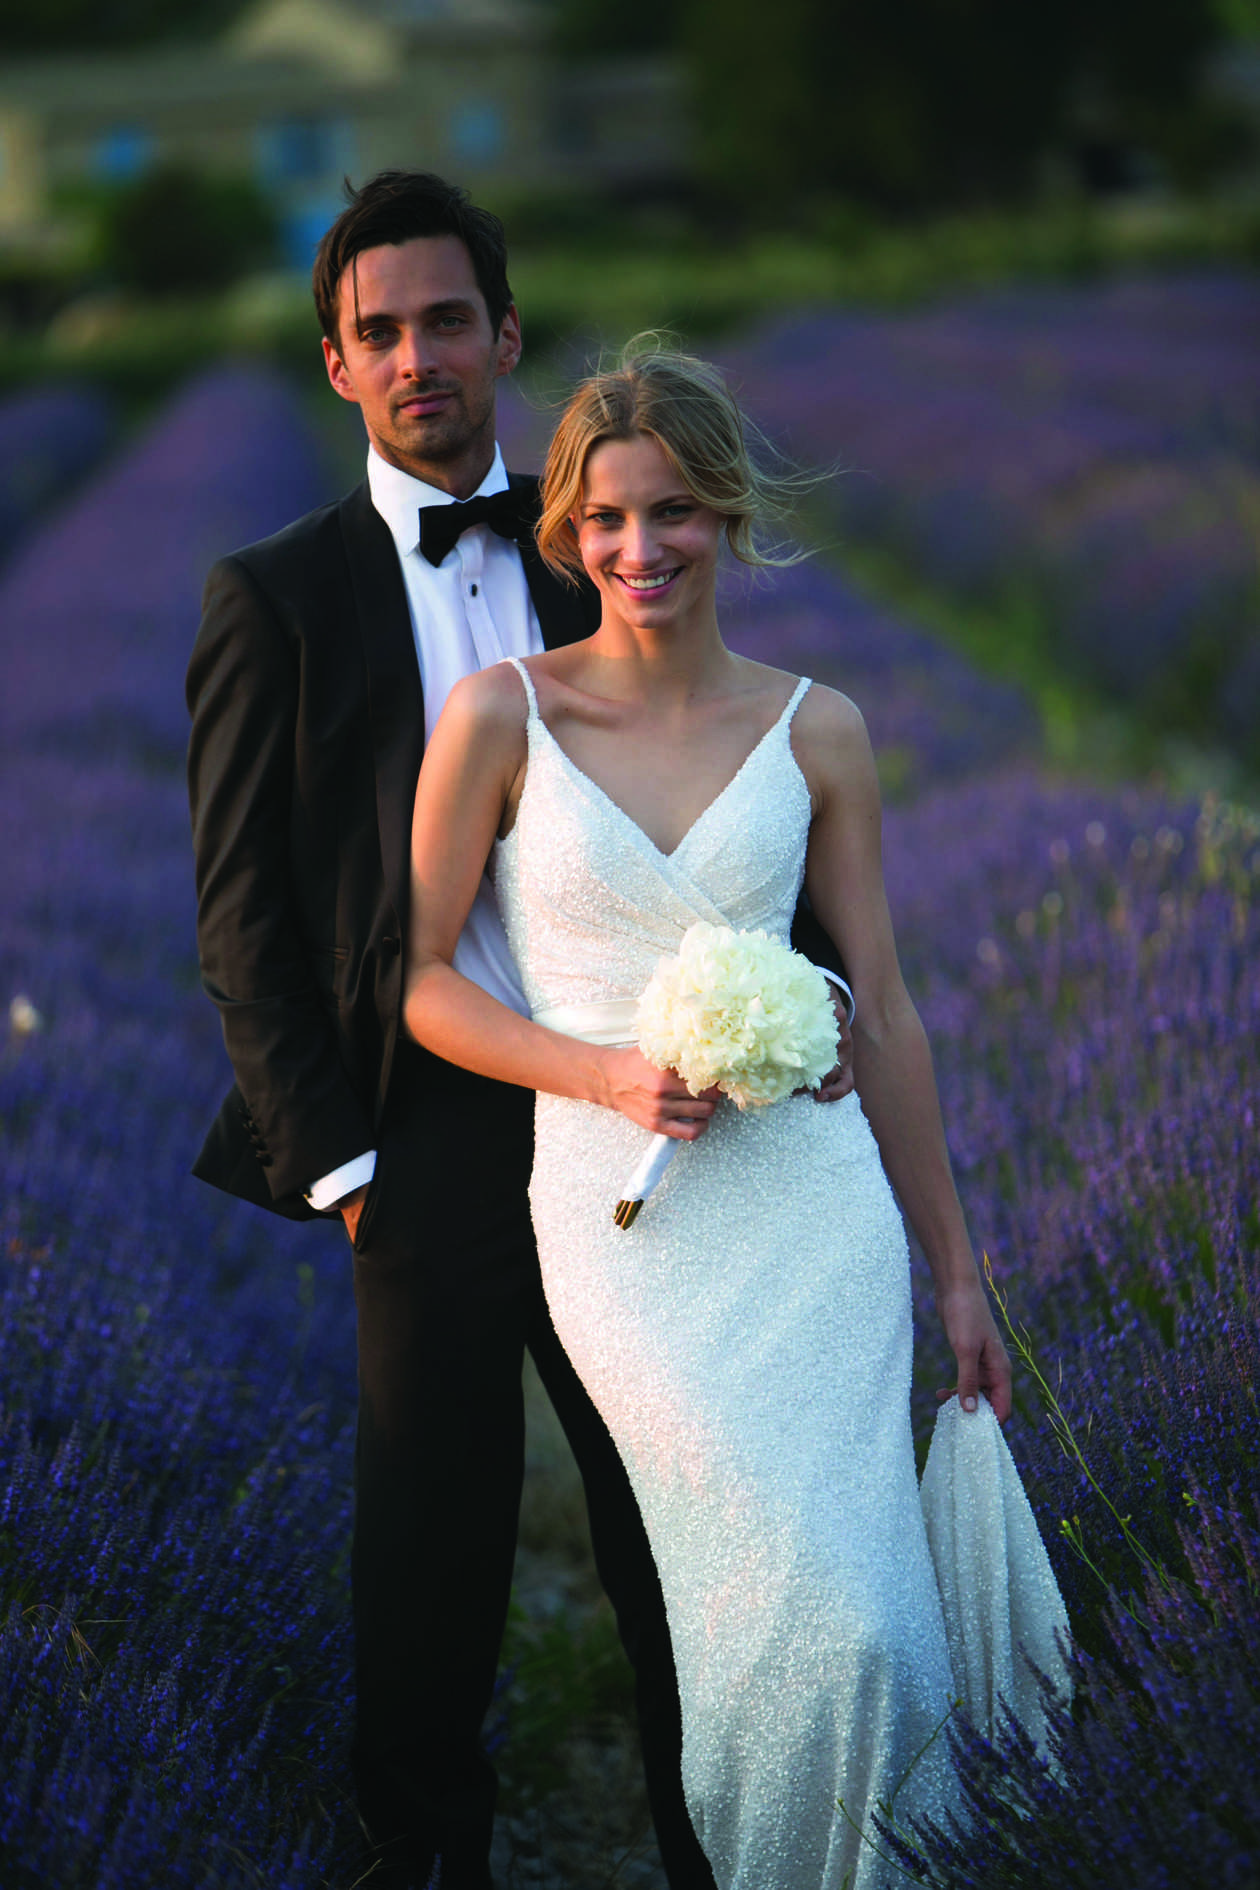 Wedding Dress by Lisa Gowing at Real Weddings